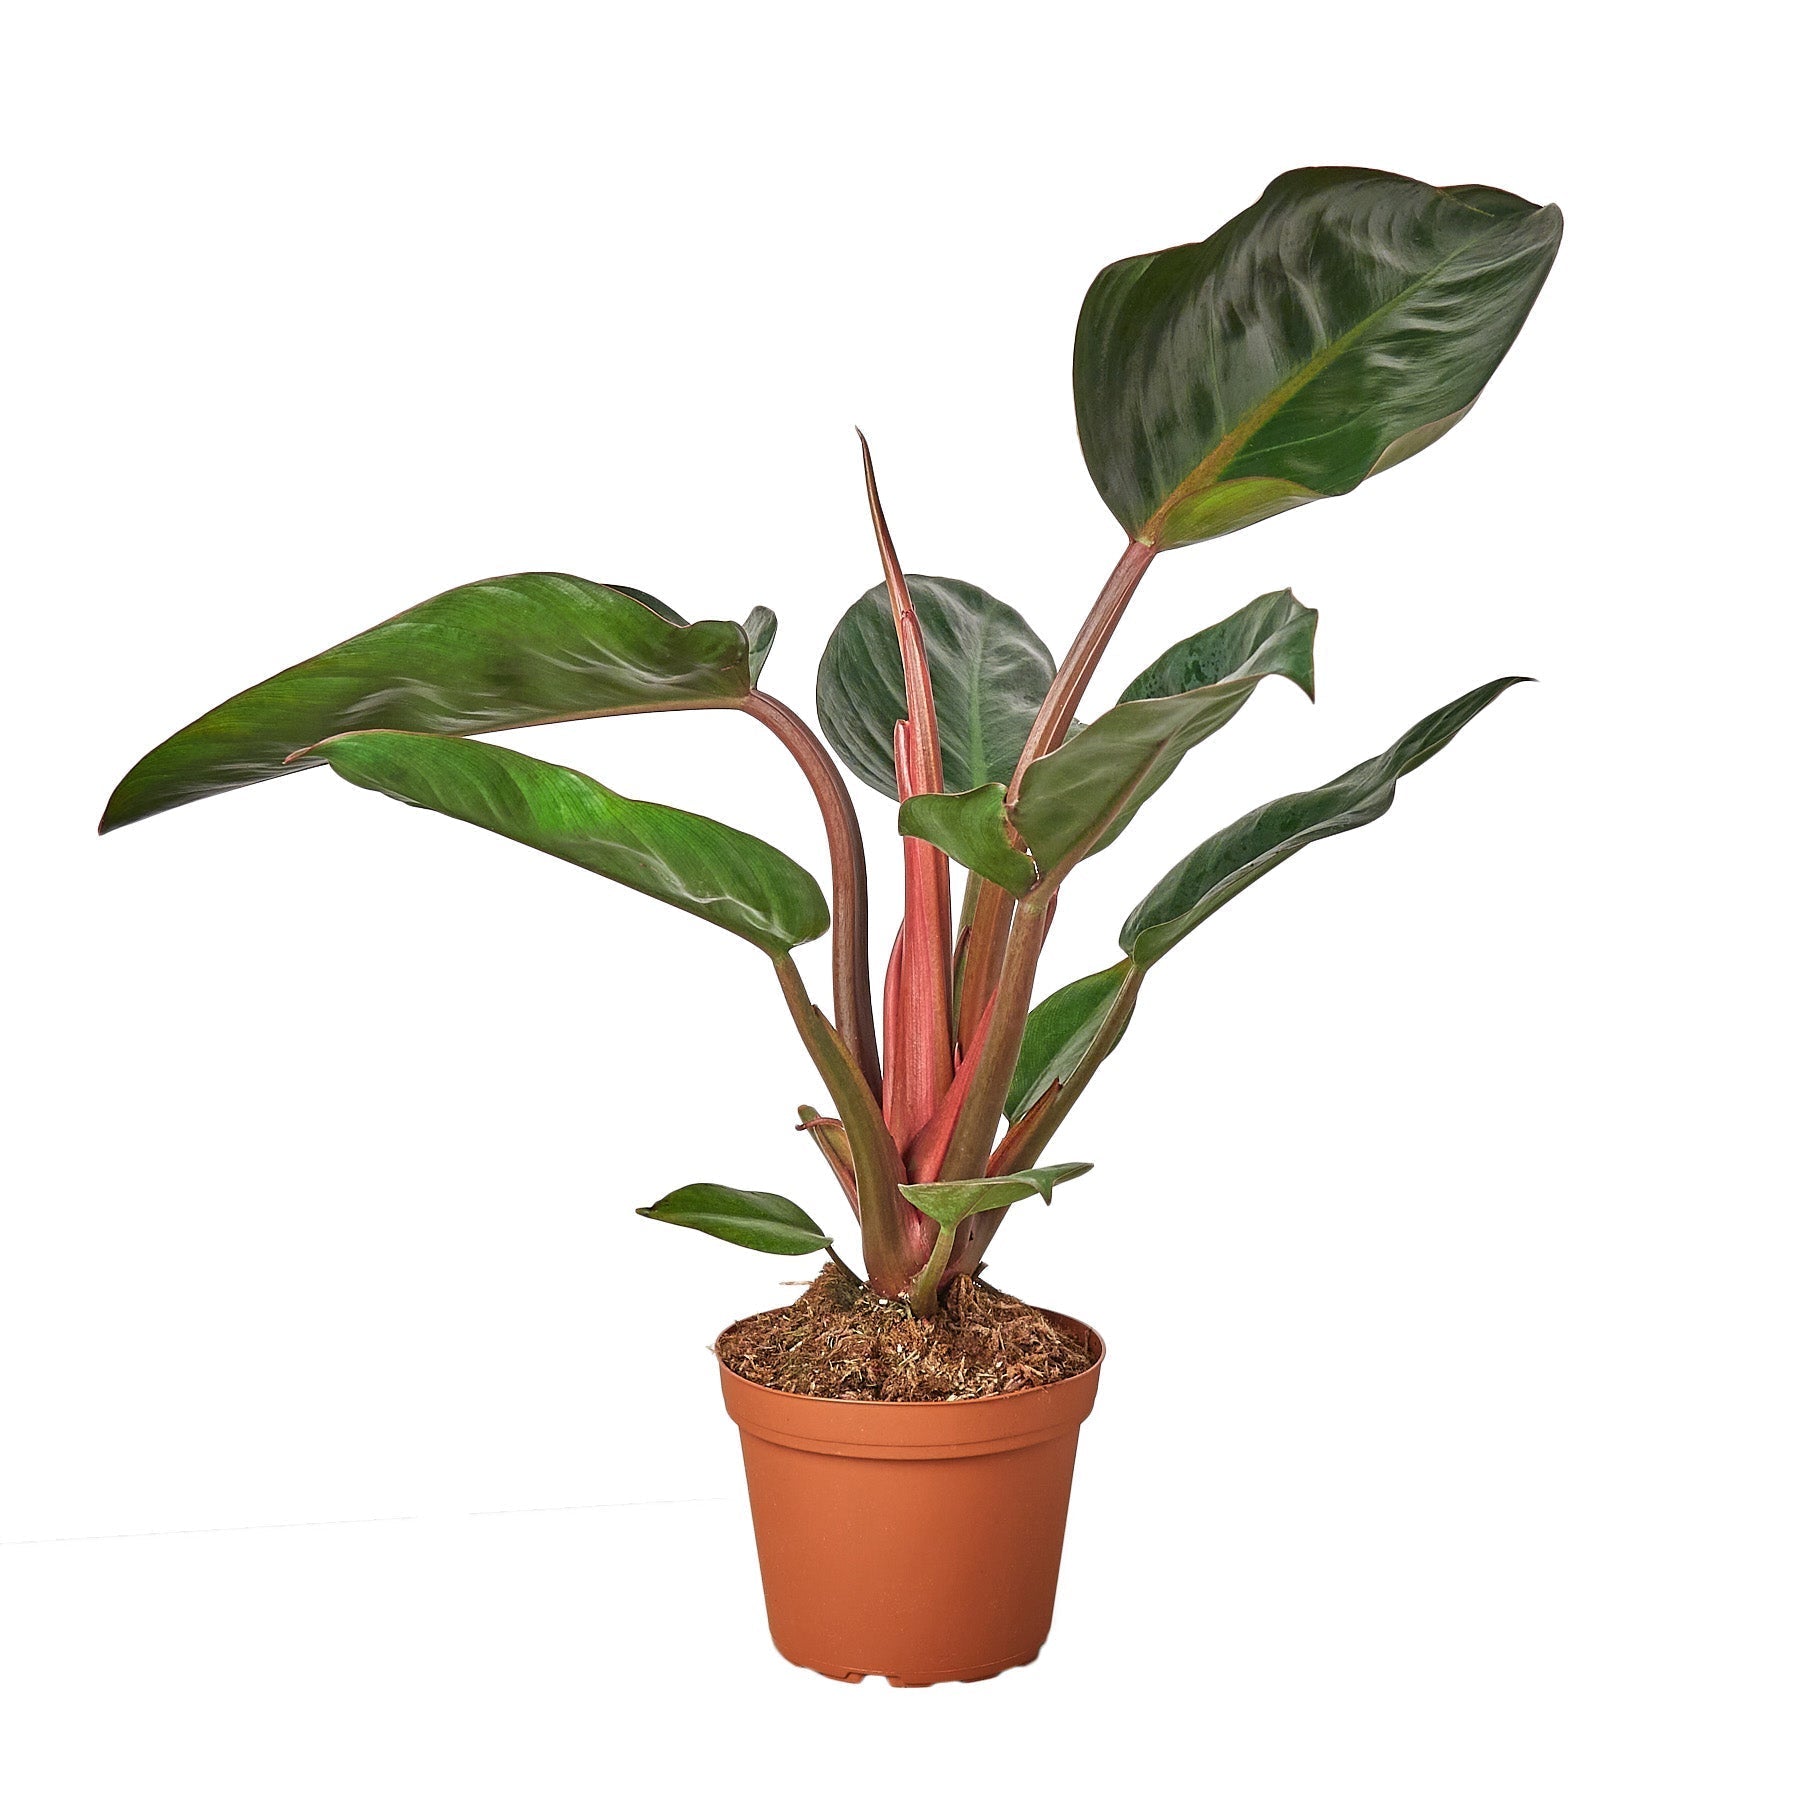 Philodendron 'Congo Rojo' - 6" Pot - NURSERY POT ONLY - One Beleaf Away Plant Studio